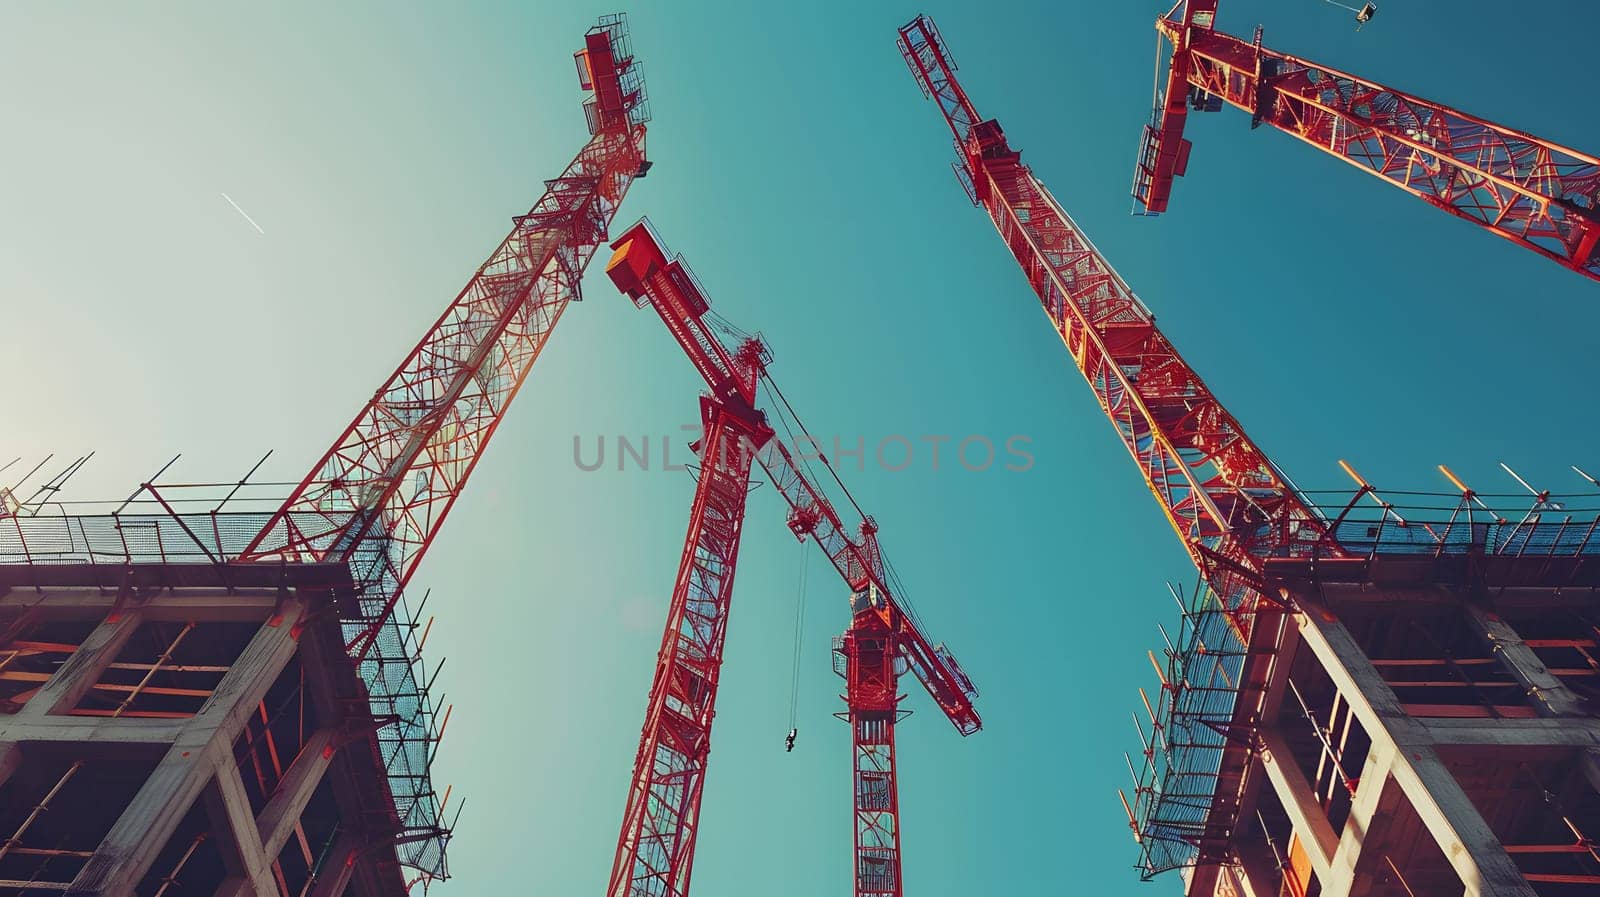 A group of engineering cranes are gazing up at a composite material building under construction, against the leisurely sky backdrop